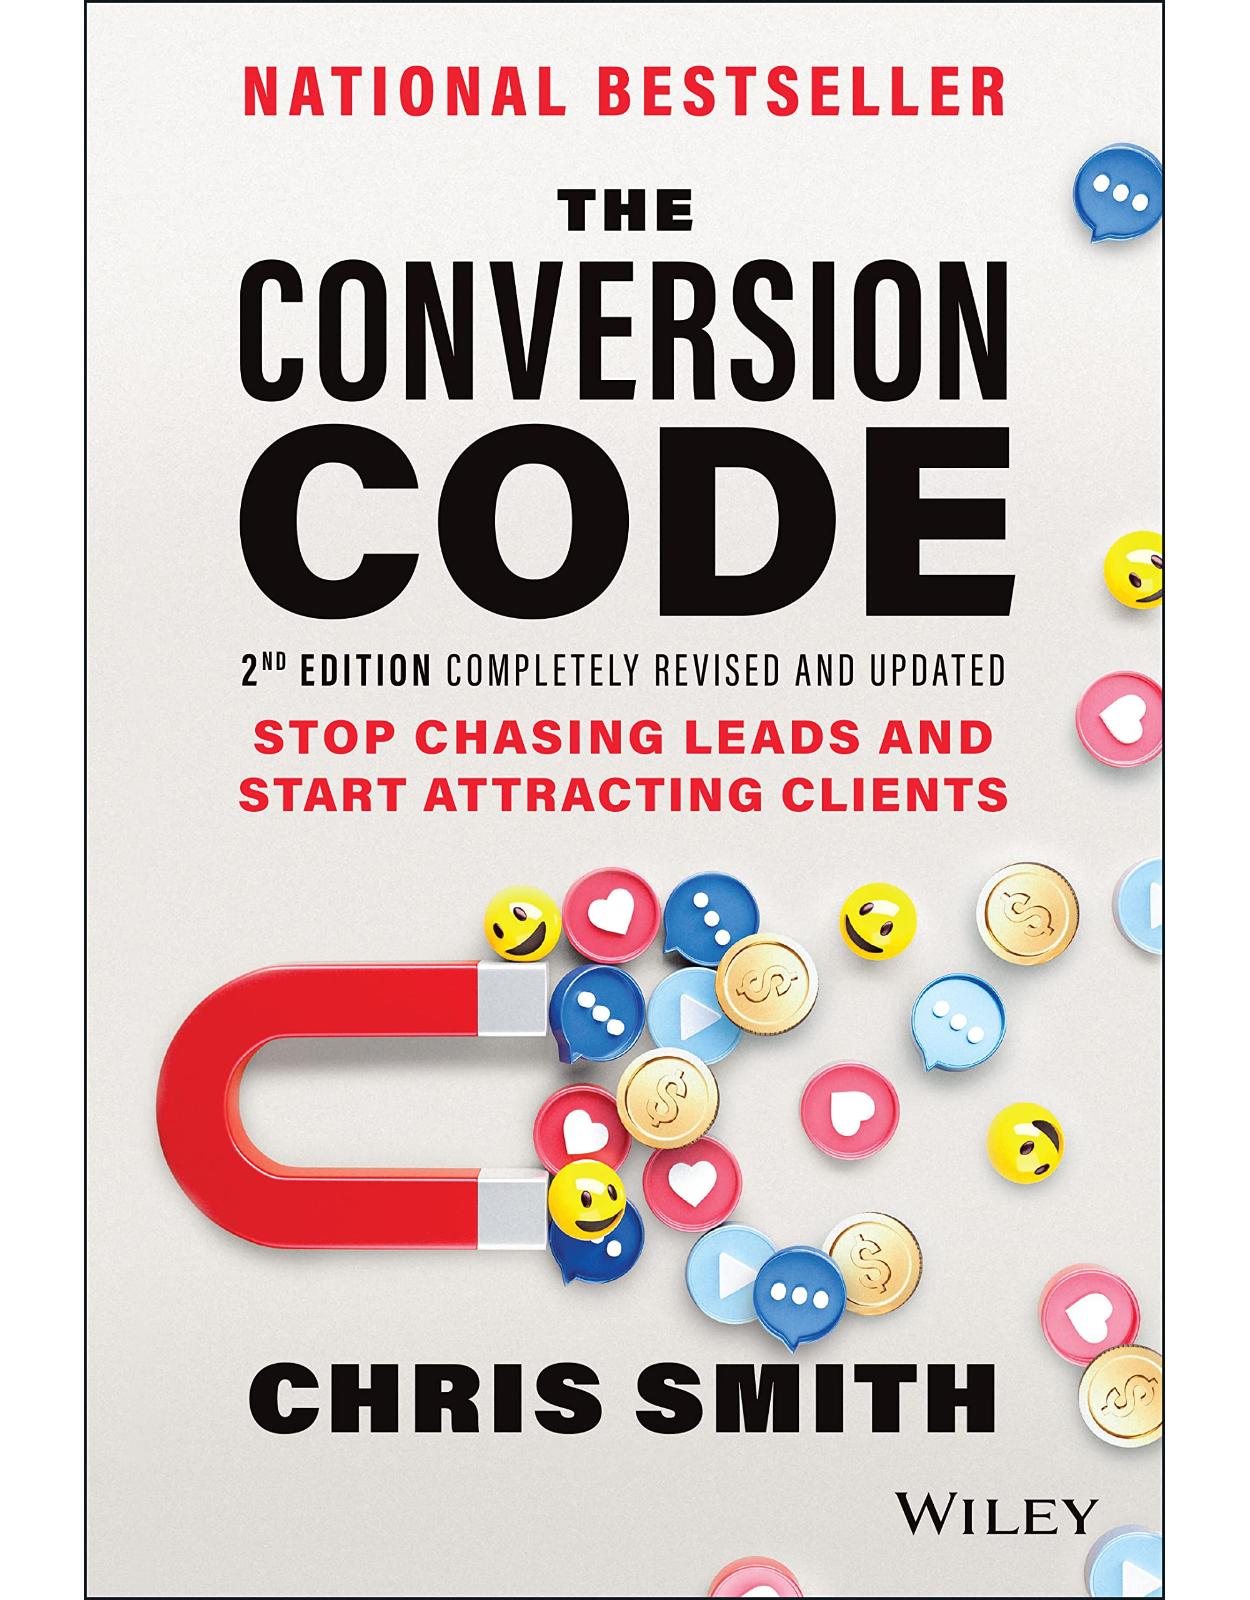 The Conversion Code, 2nd Edition